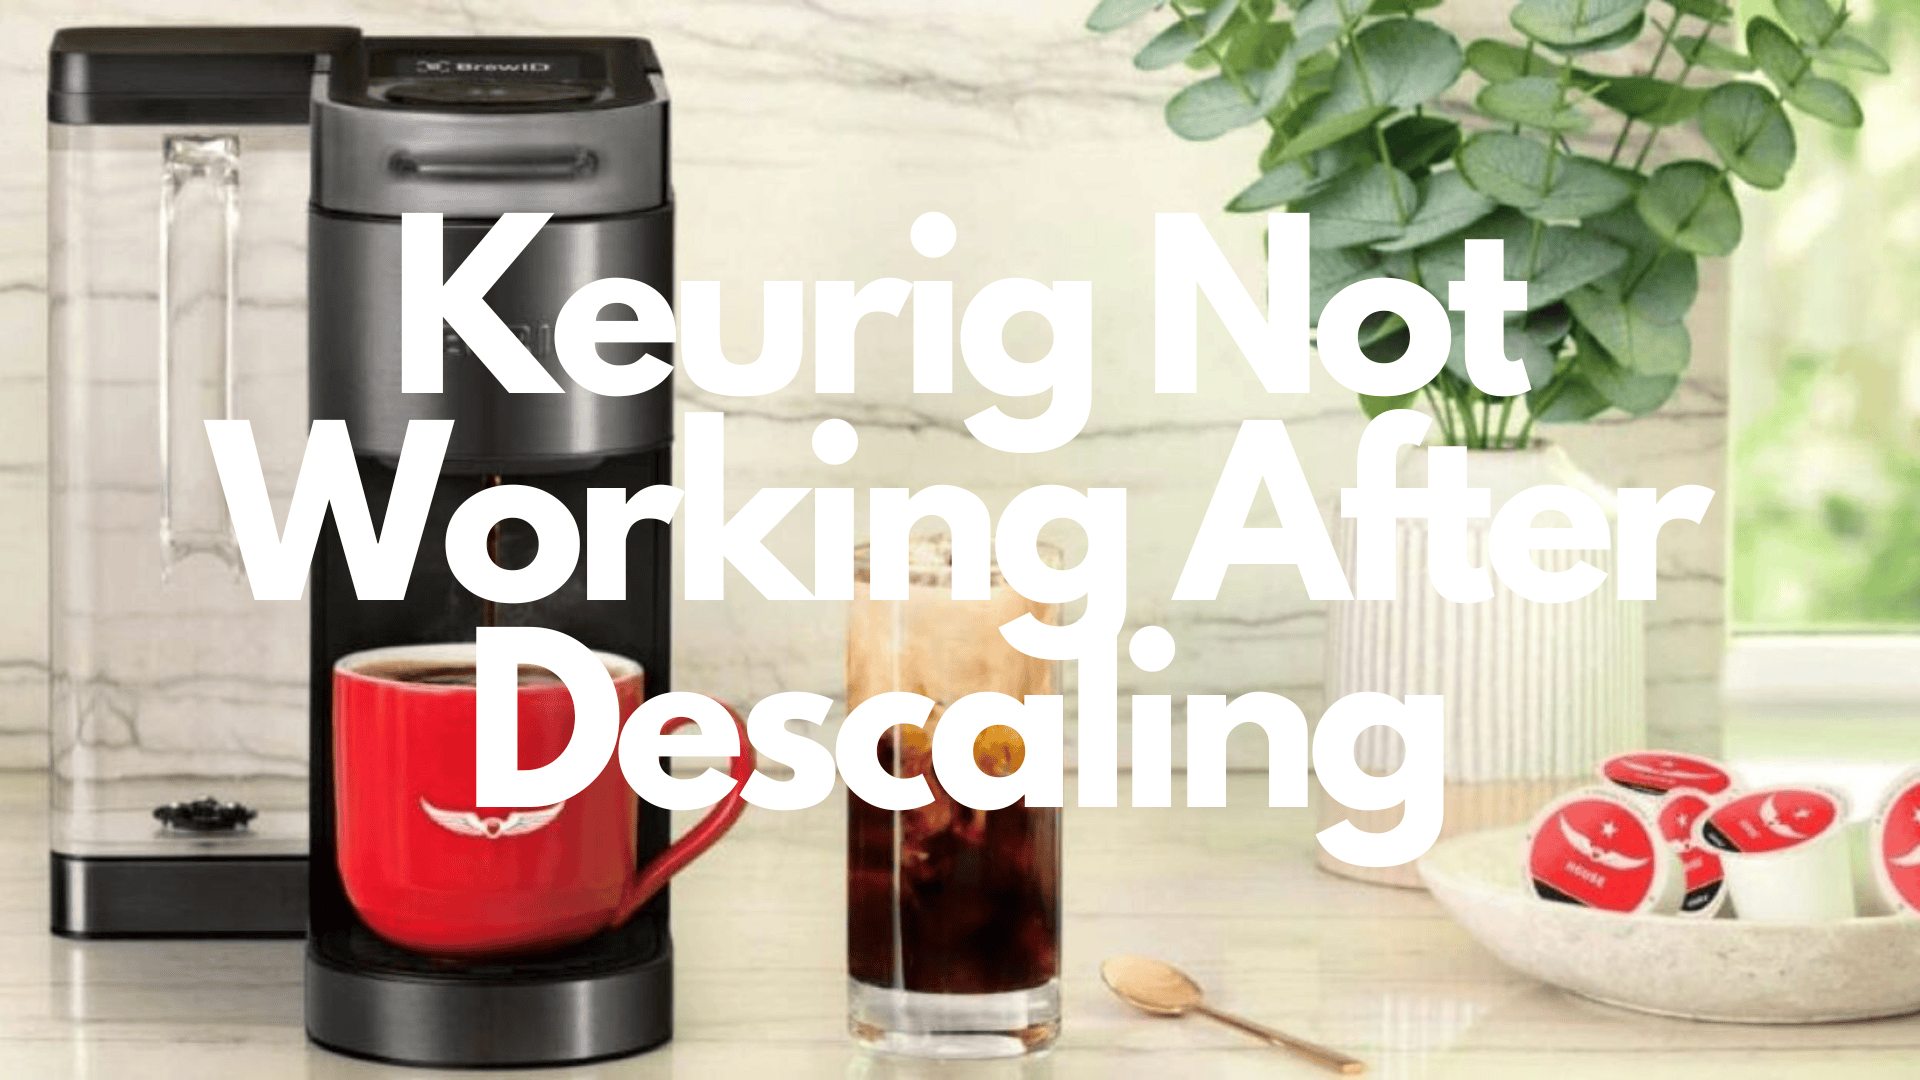 https://angryespresso.com/wp-content/uploads/2023/04/Keurig-Not-Working-After-Descaling-1-1.png